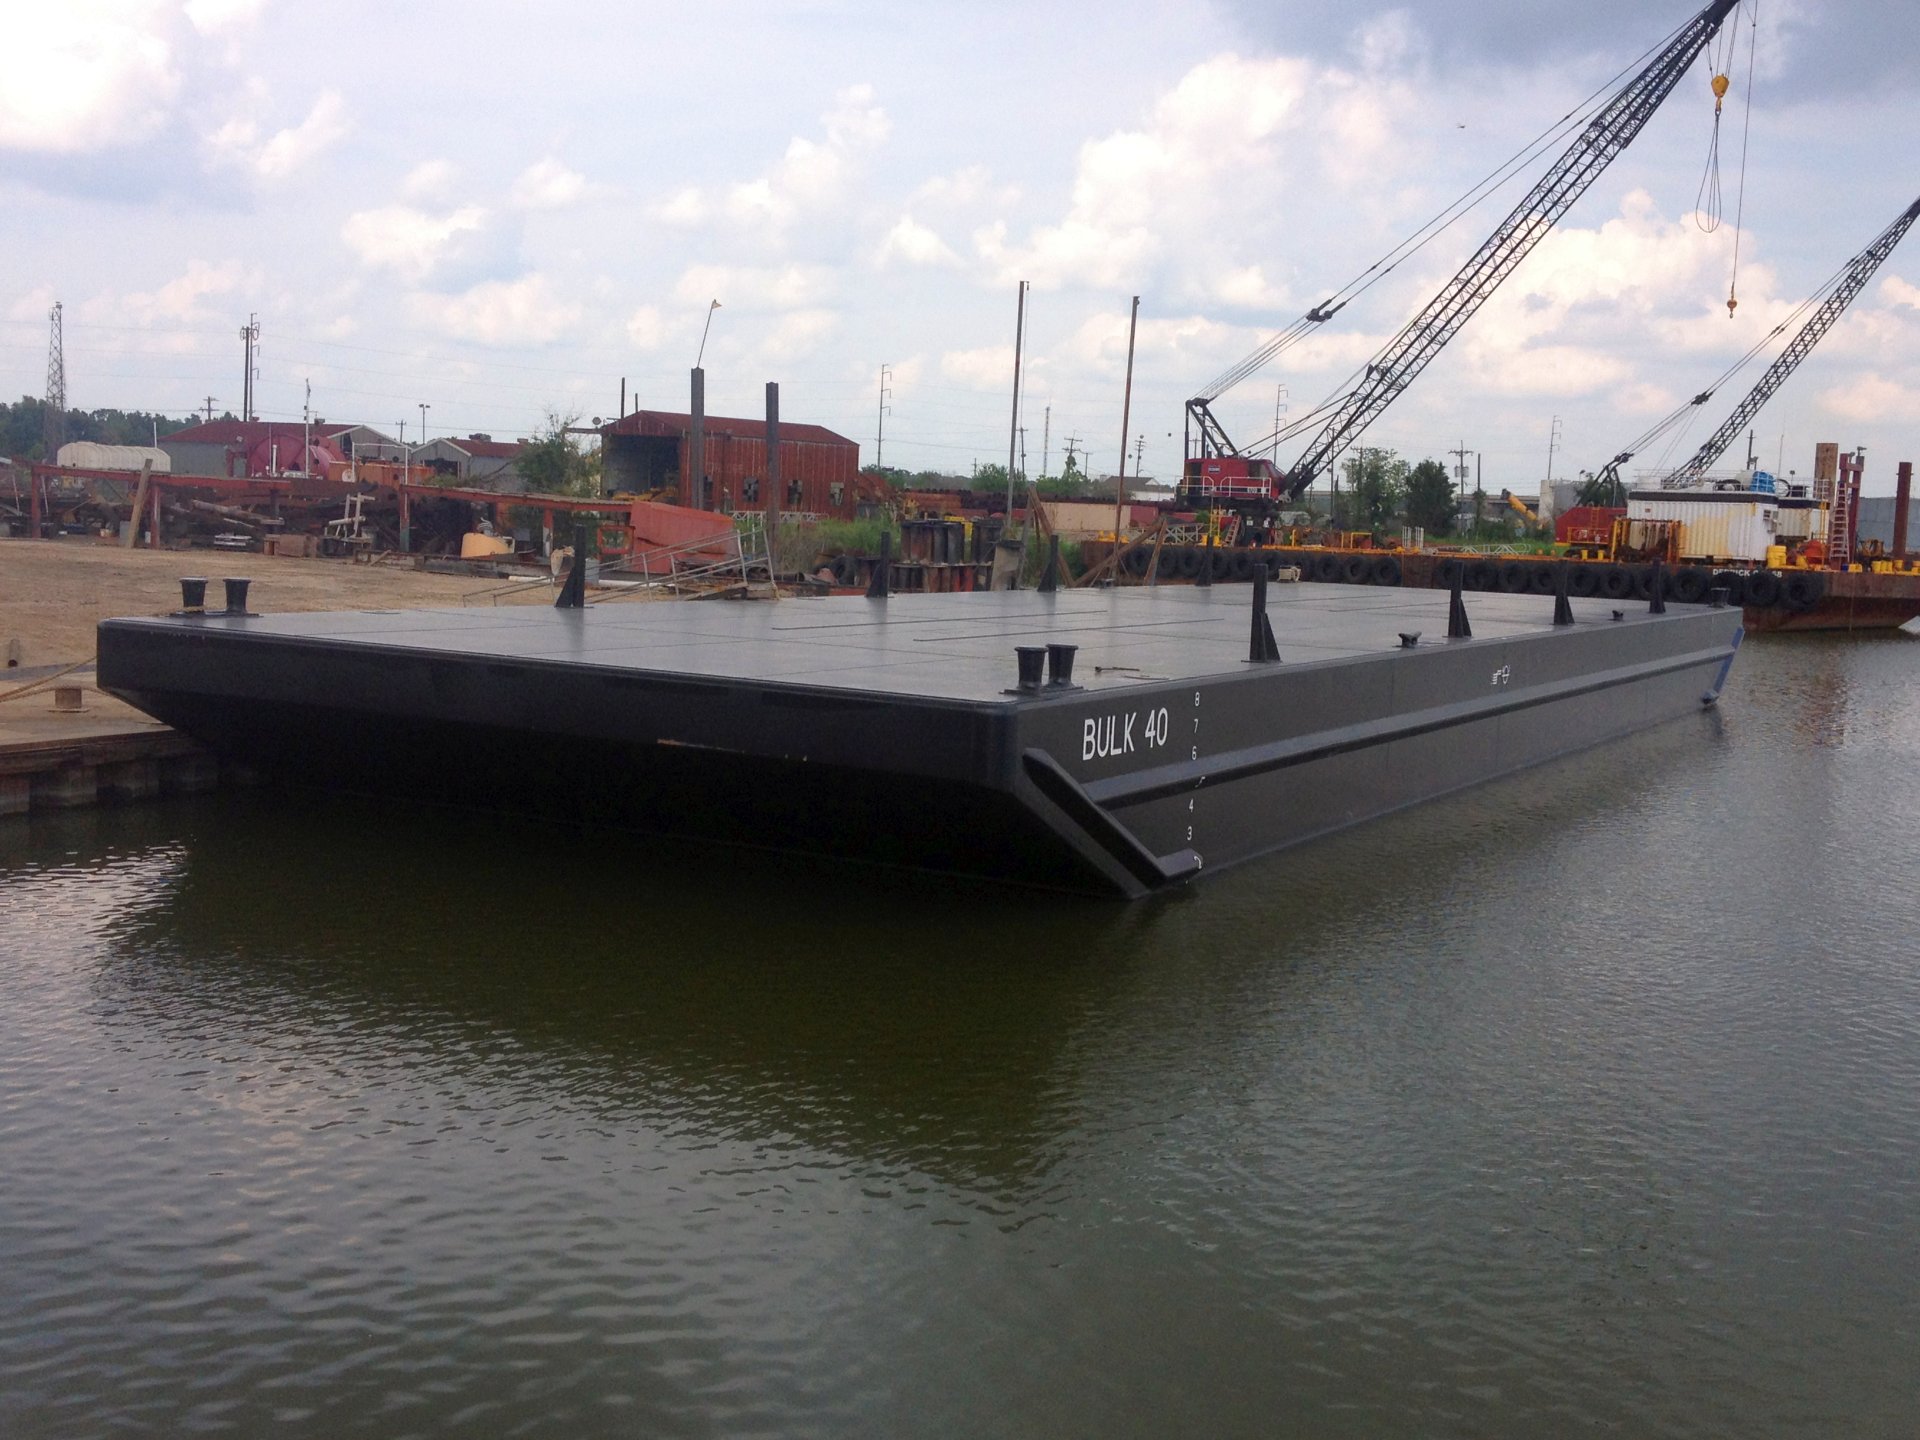 140' x 40' Deck Barge. Built to your specifications. | Halimar Shipyard